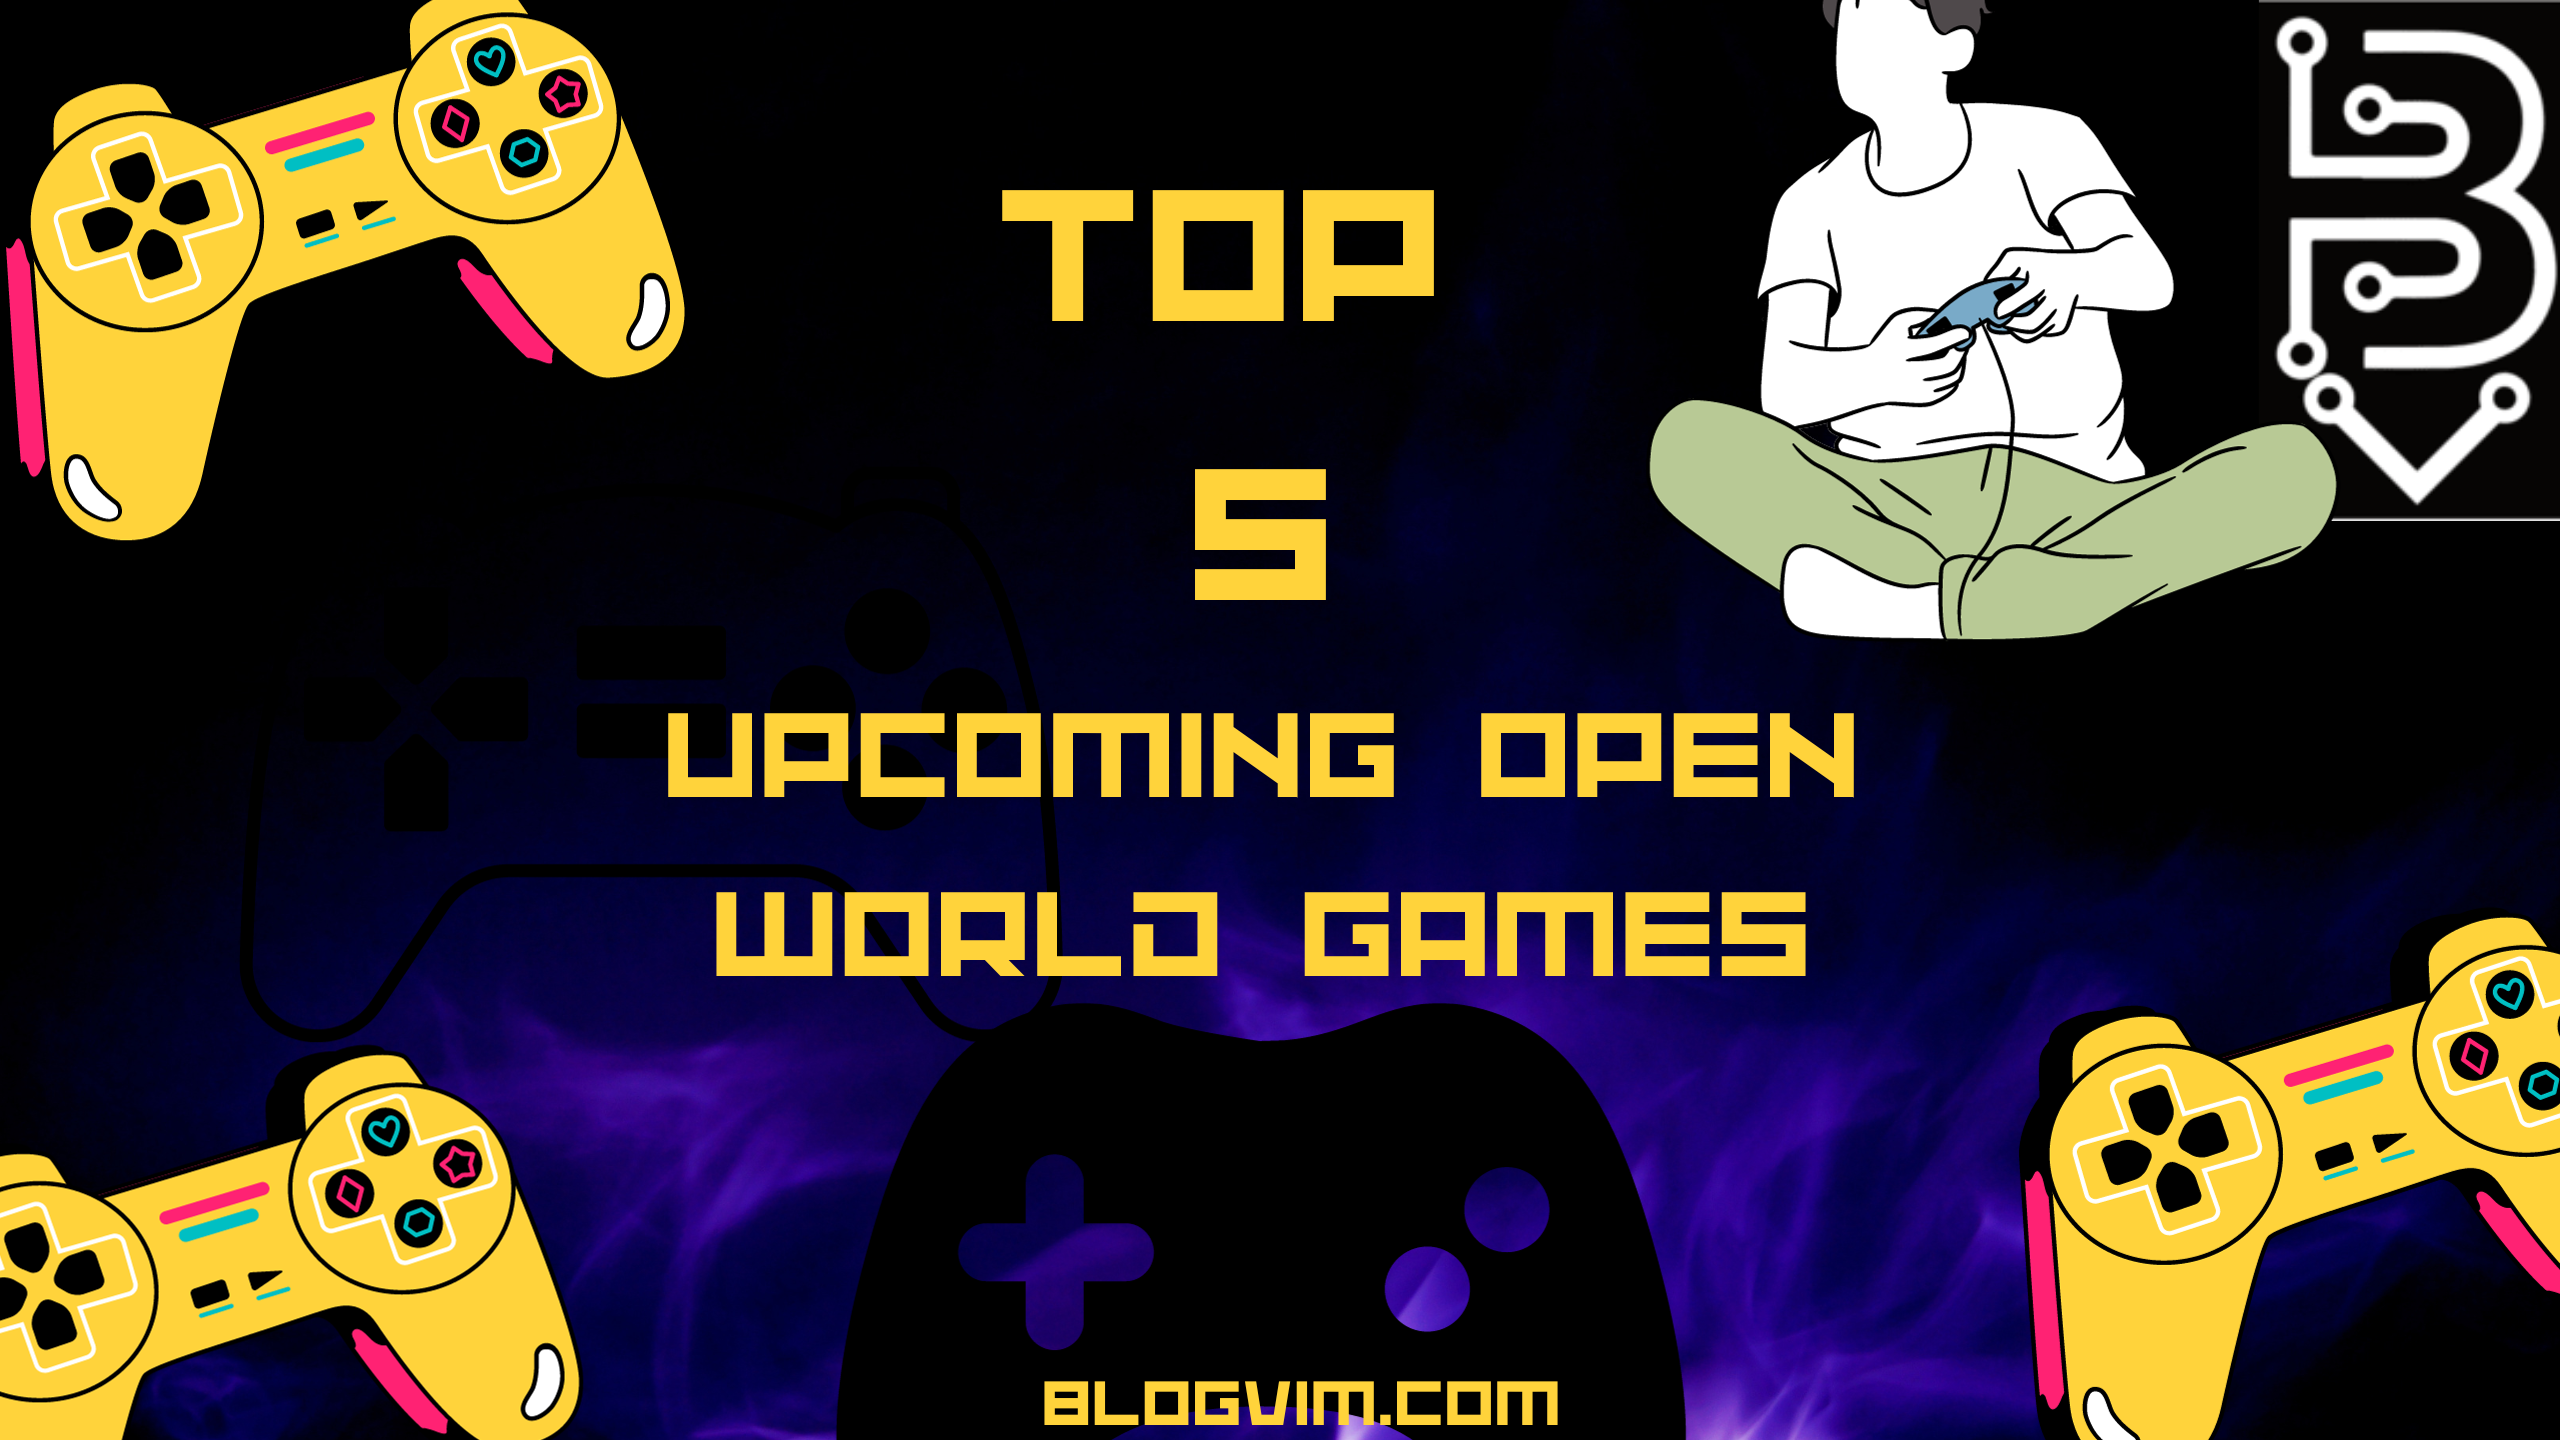 In this we gonna tell top 5 upcoming open world games